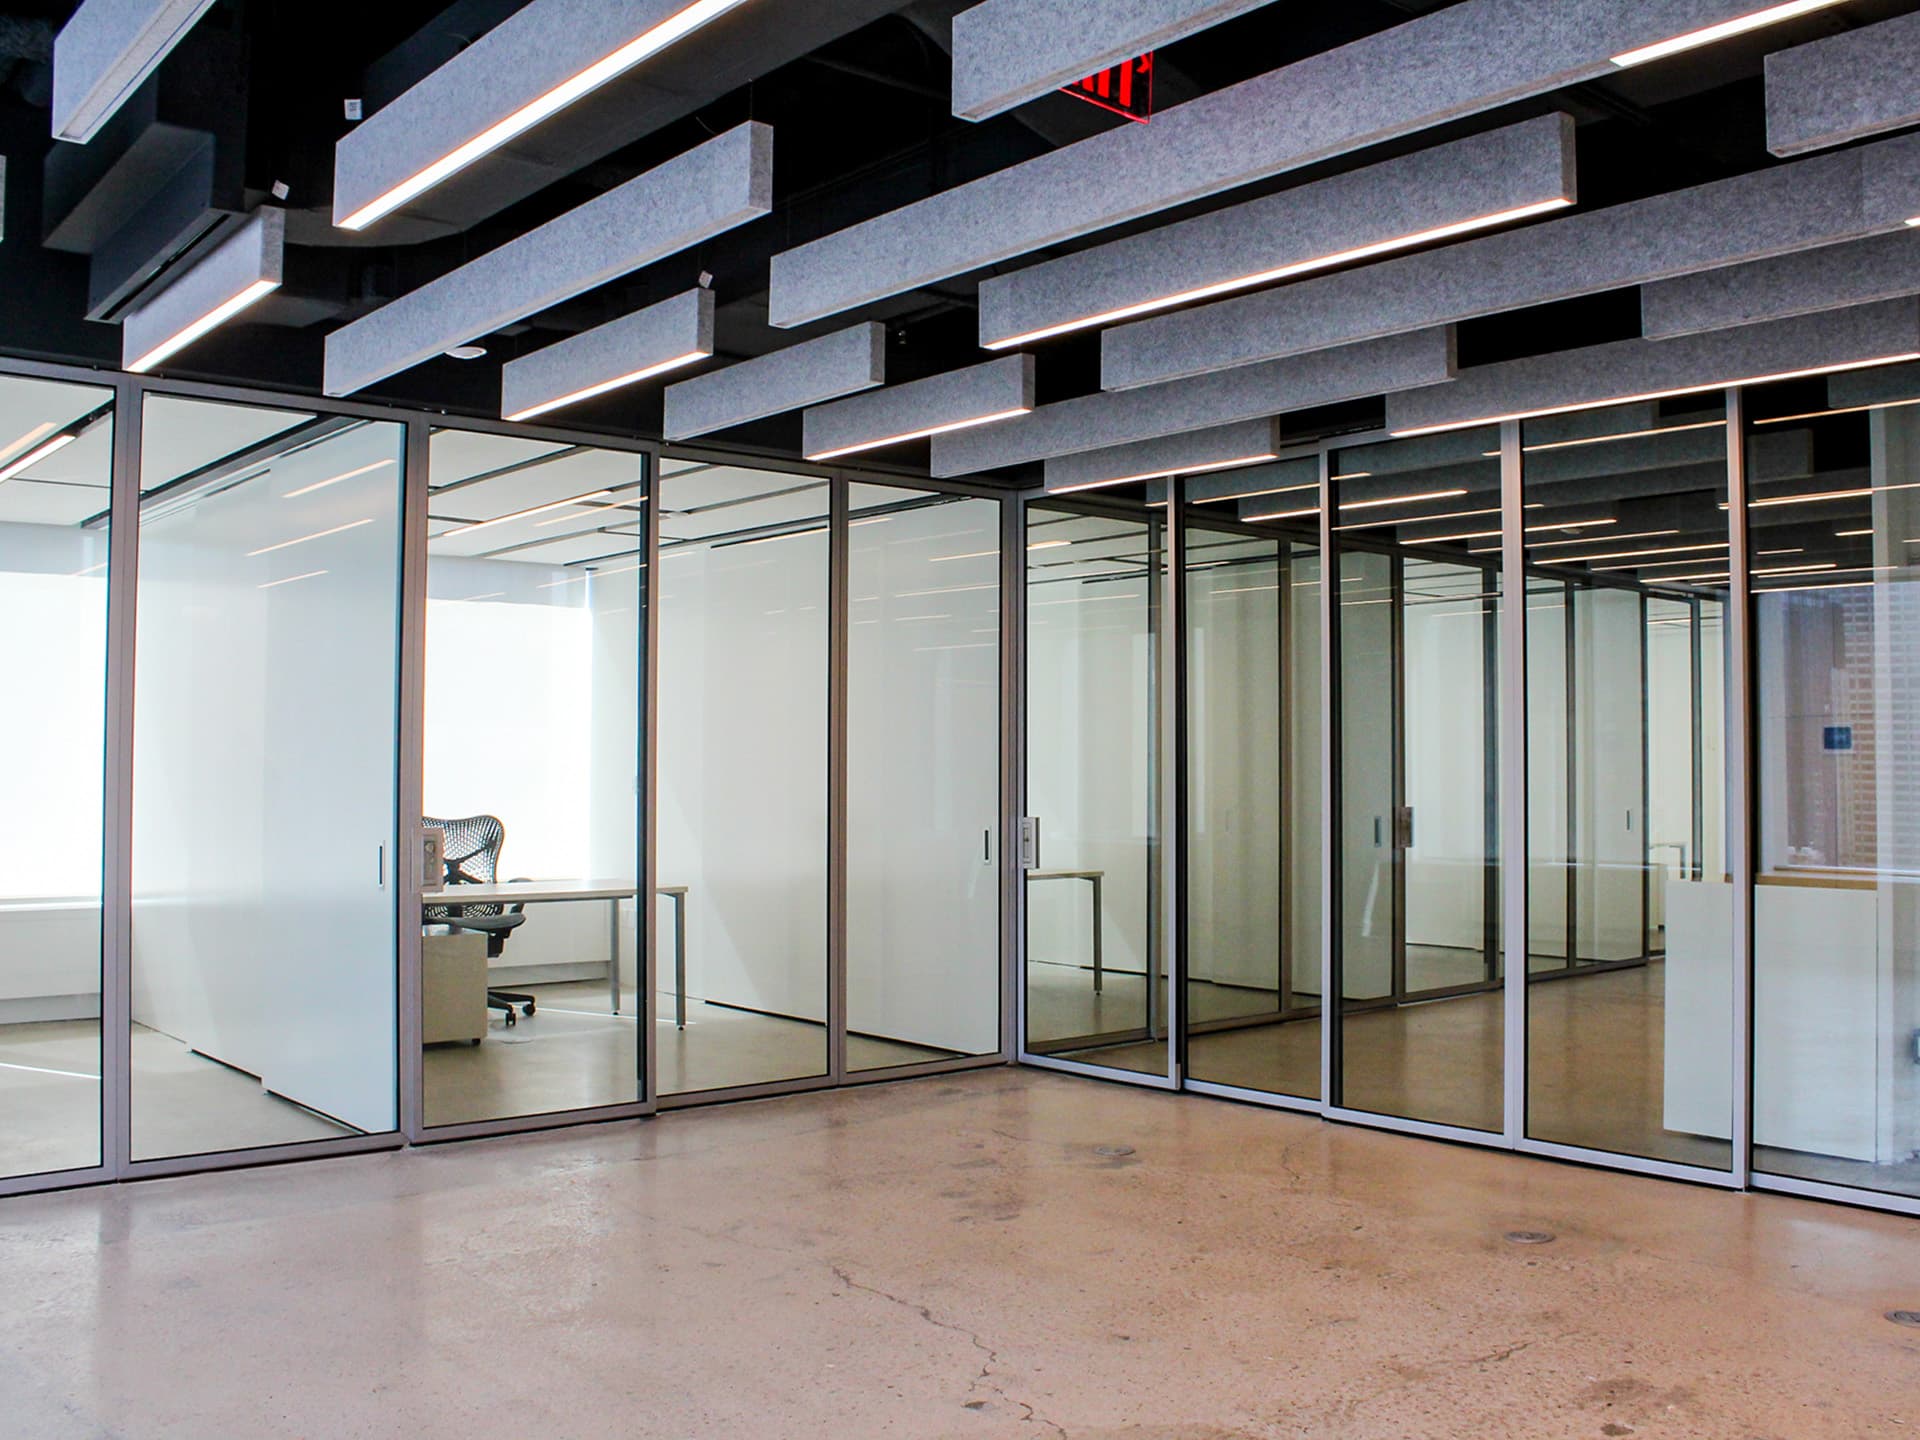 ZONA telescoping glass walls in an office interior.